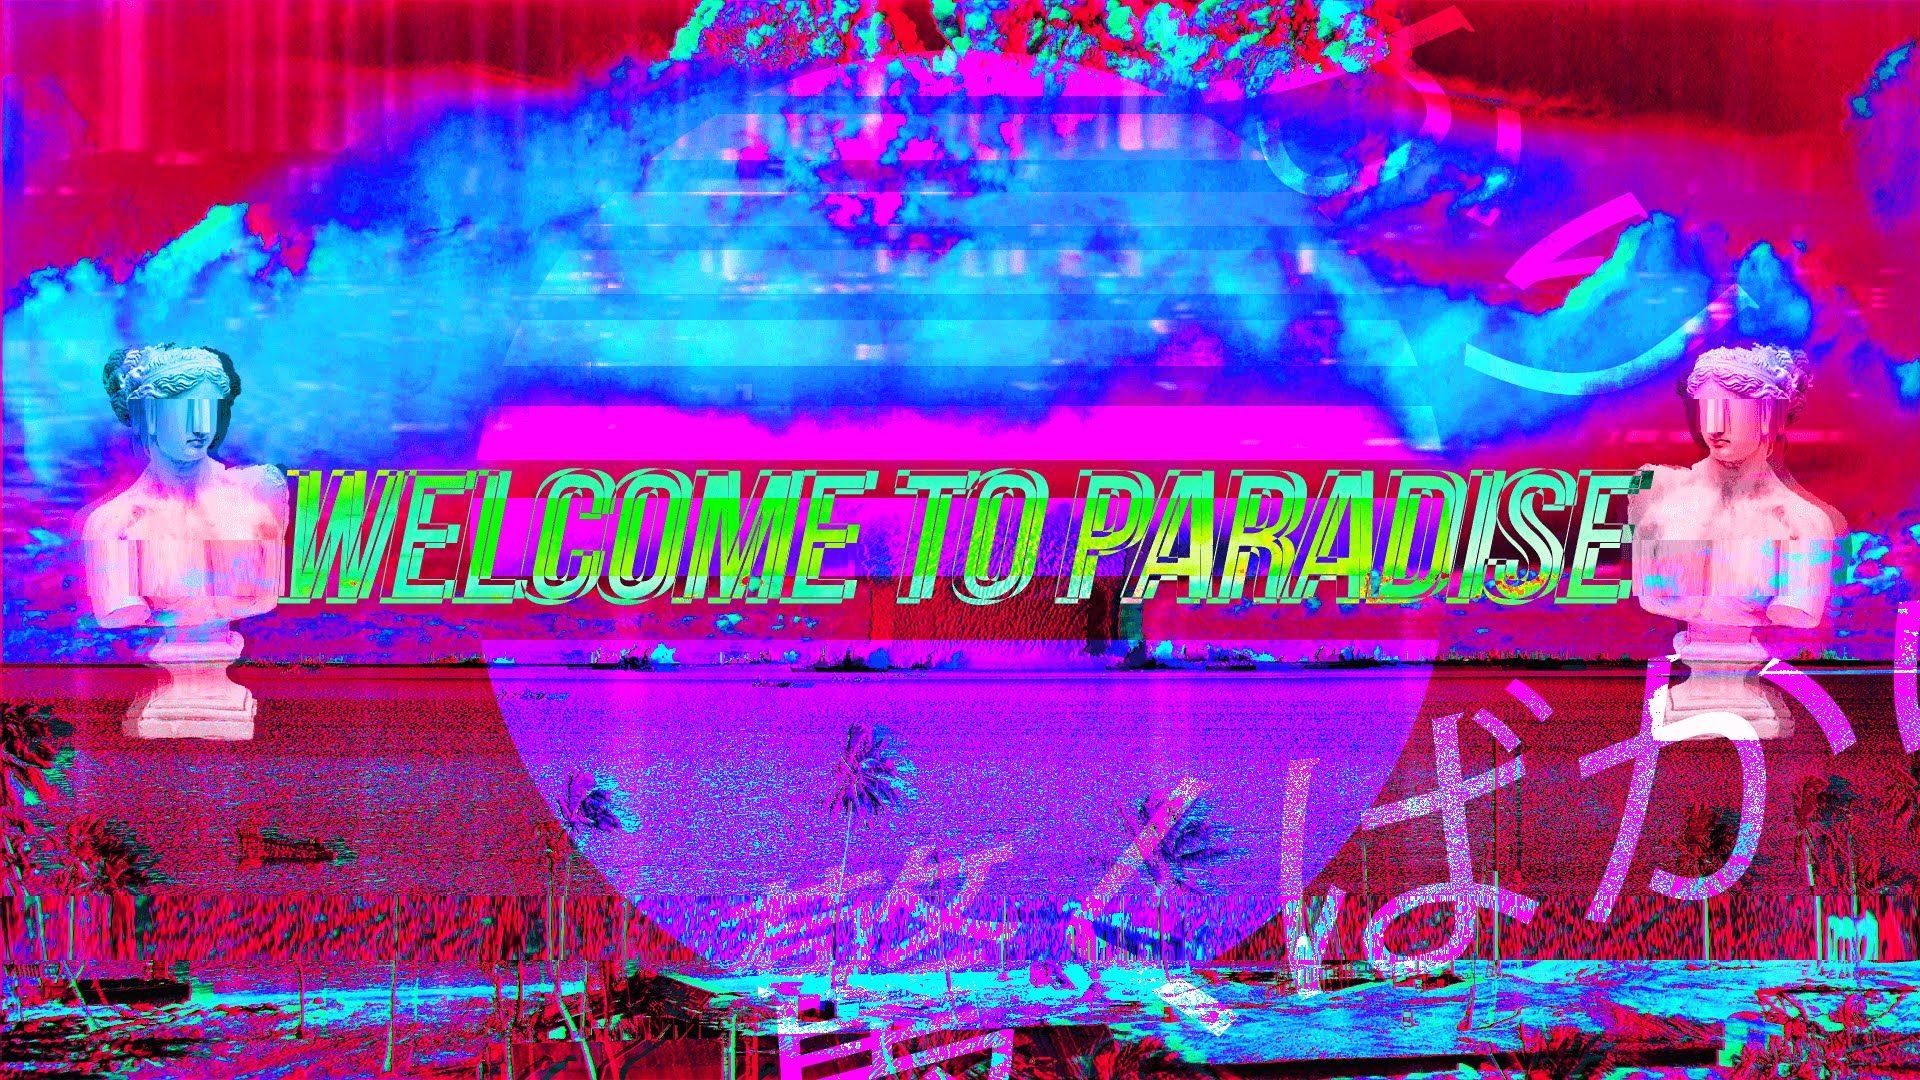 Welcome to paradise, neon sign with distorted glitch effect - Vaporwave